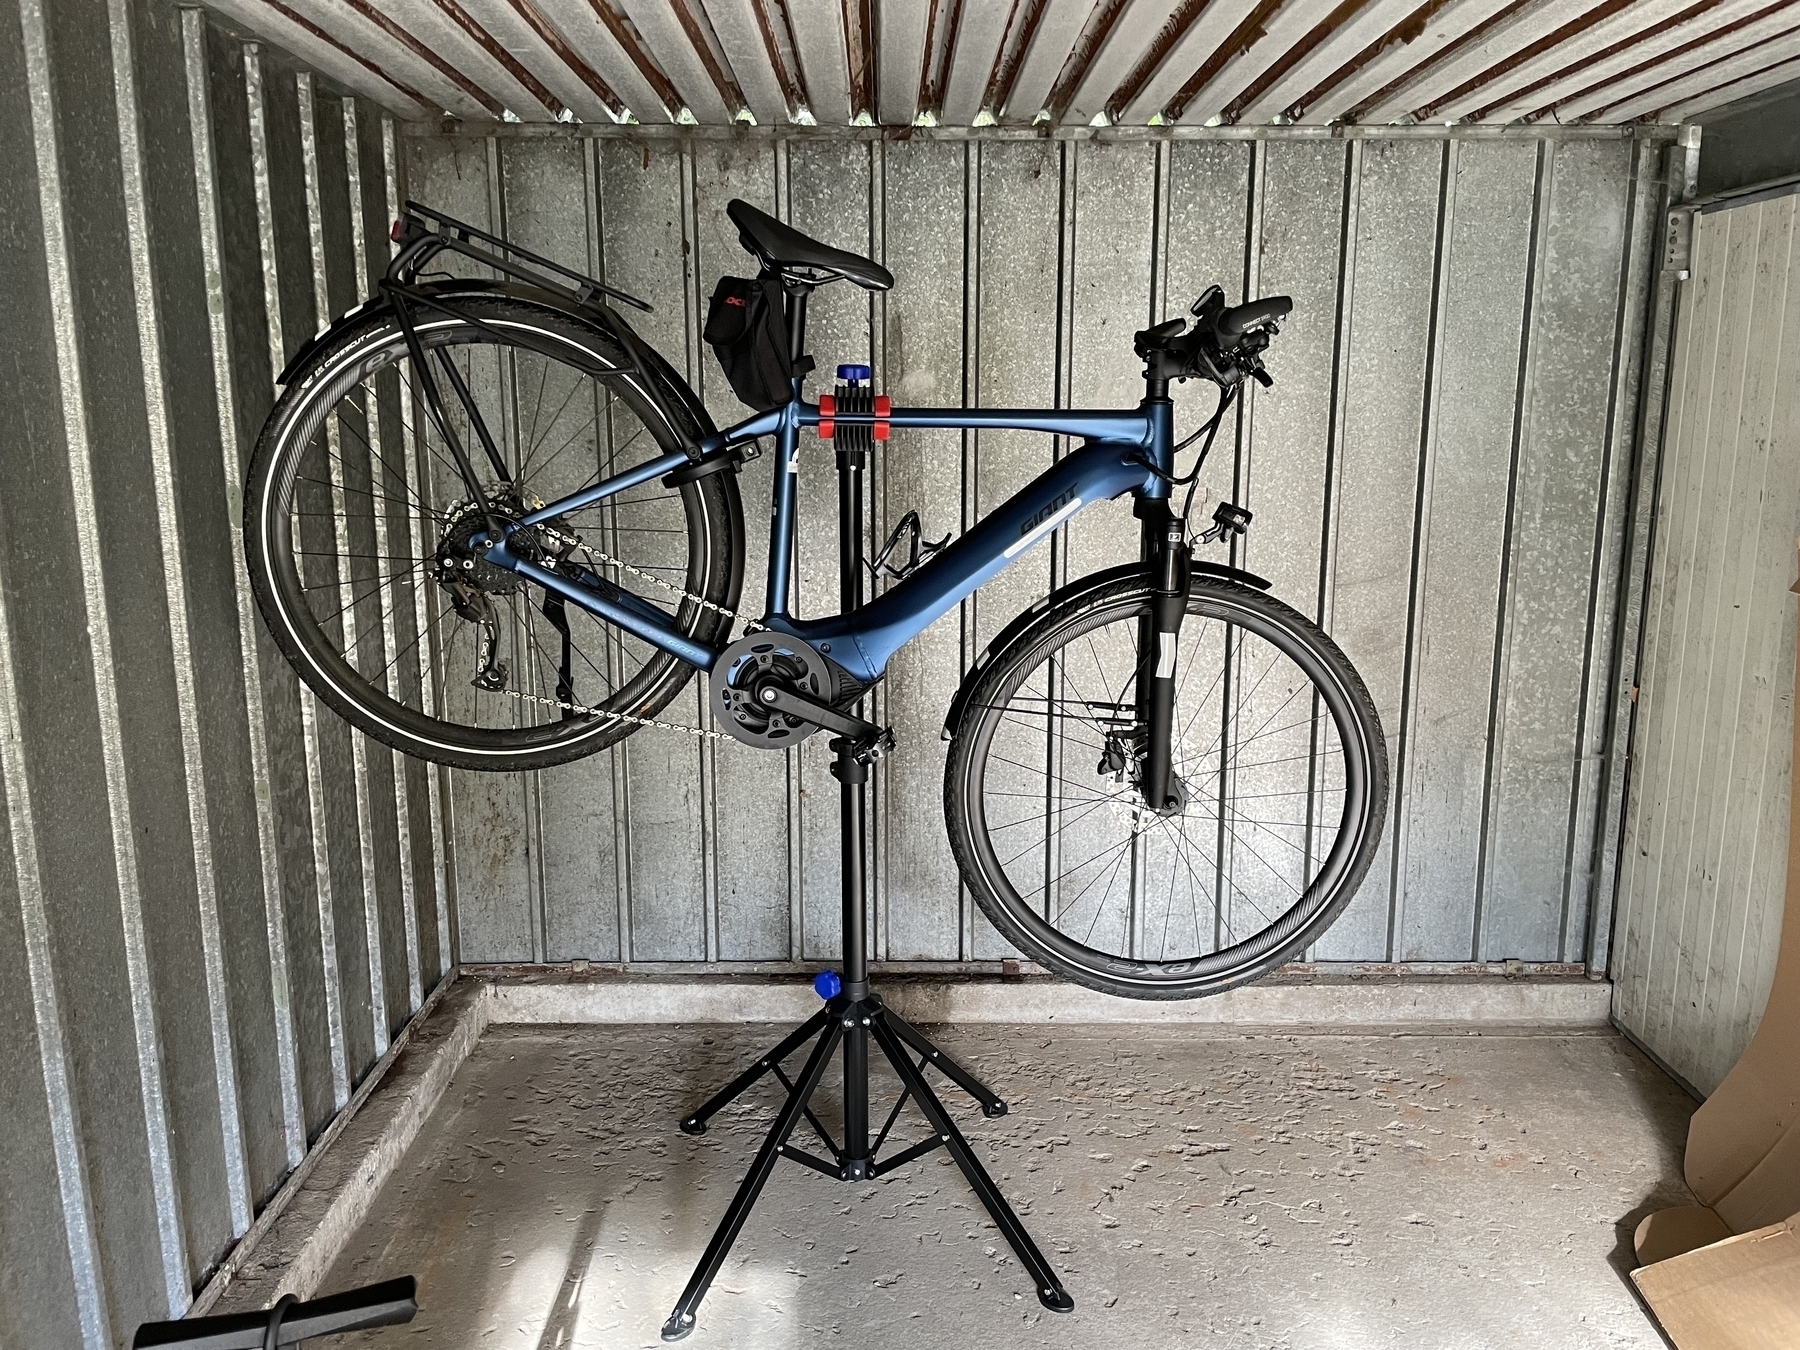 Blue electric bike suspended on a bike holder in mid-air. The bike holder is a black bar with four legs, on top is another bar at an 90 degree angle and a clamp holding the bike right over the motor for the center of gravity. The whole scene is inside a metal garage.